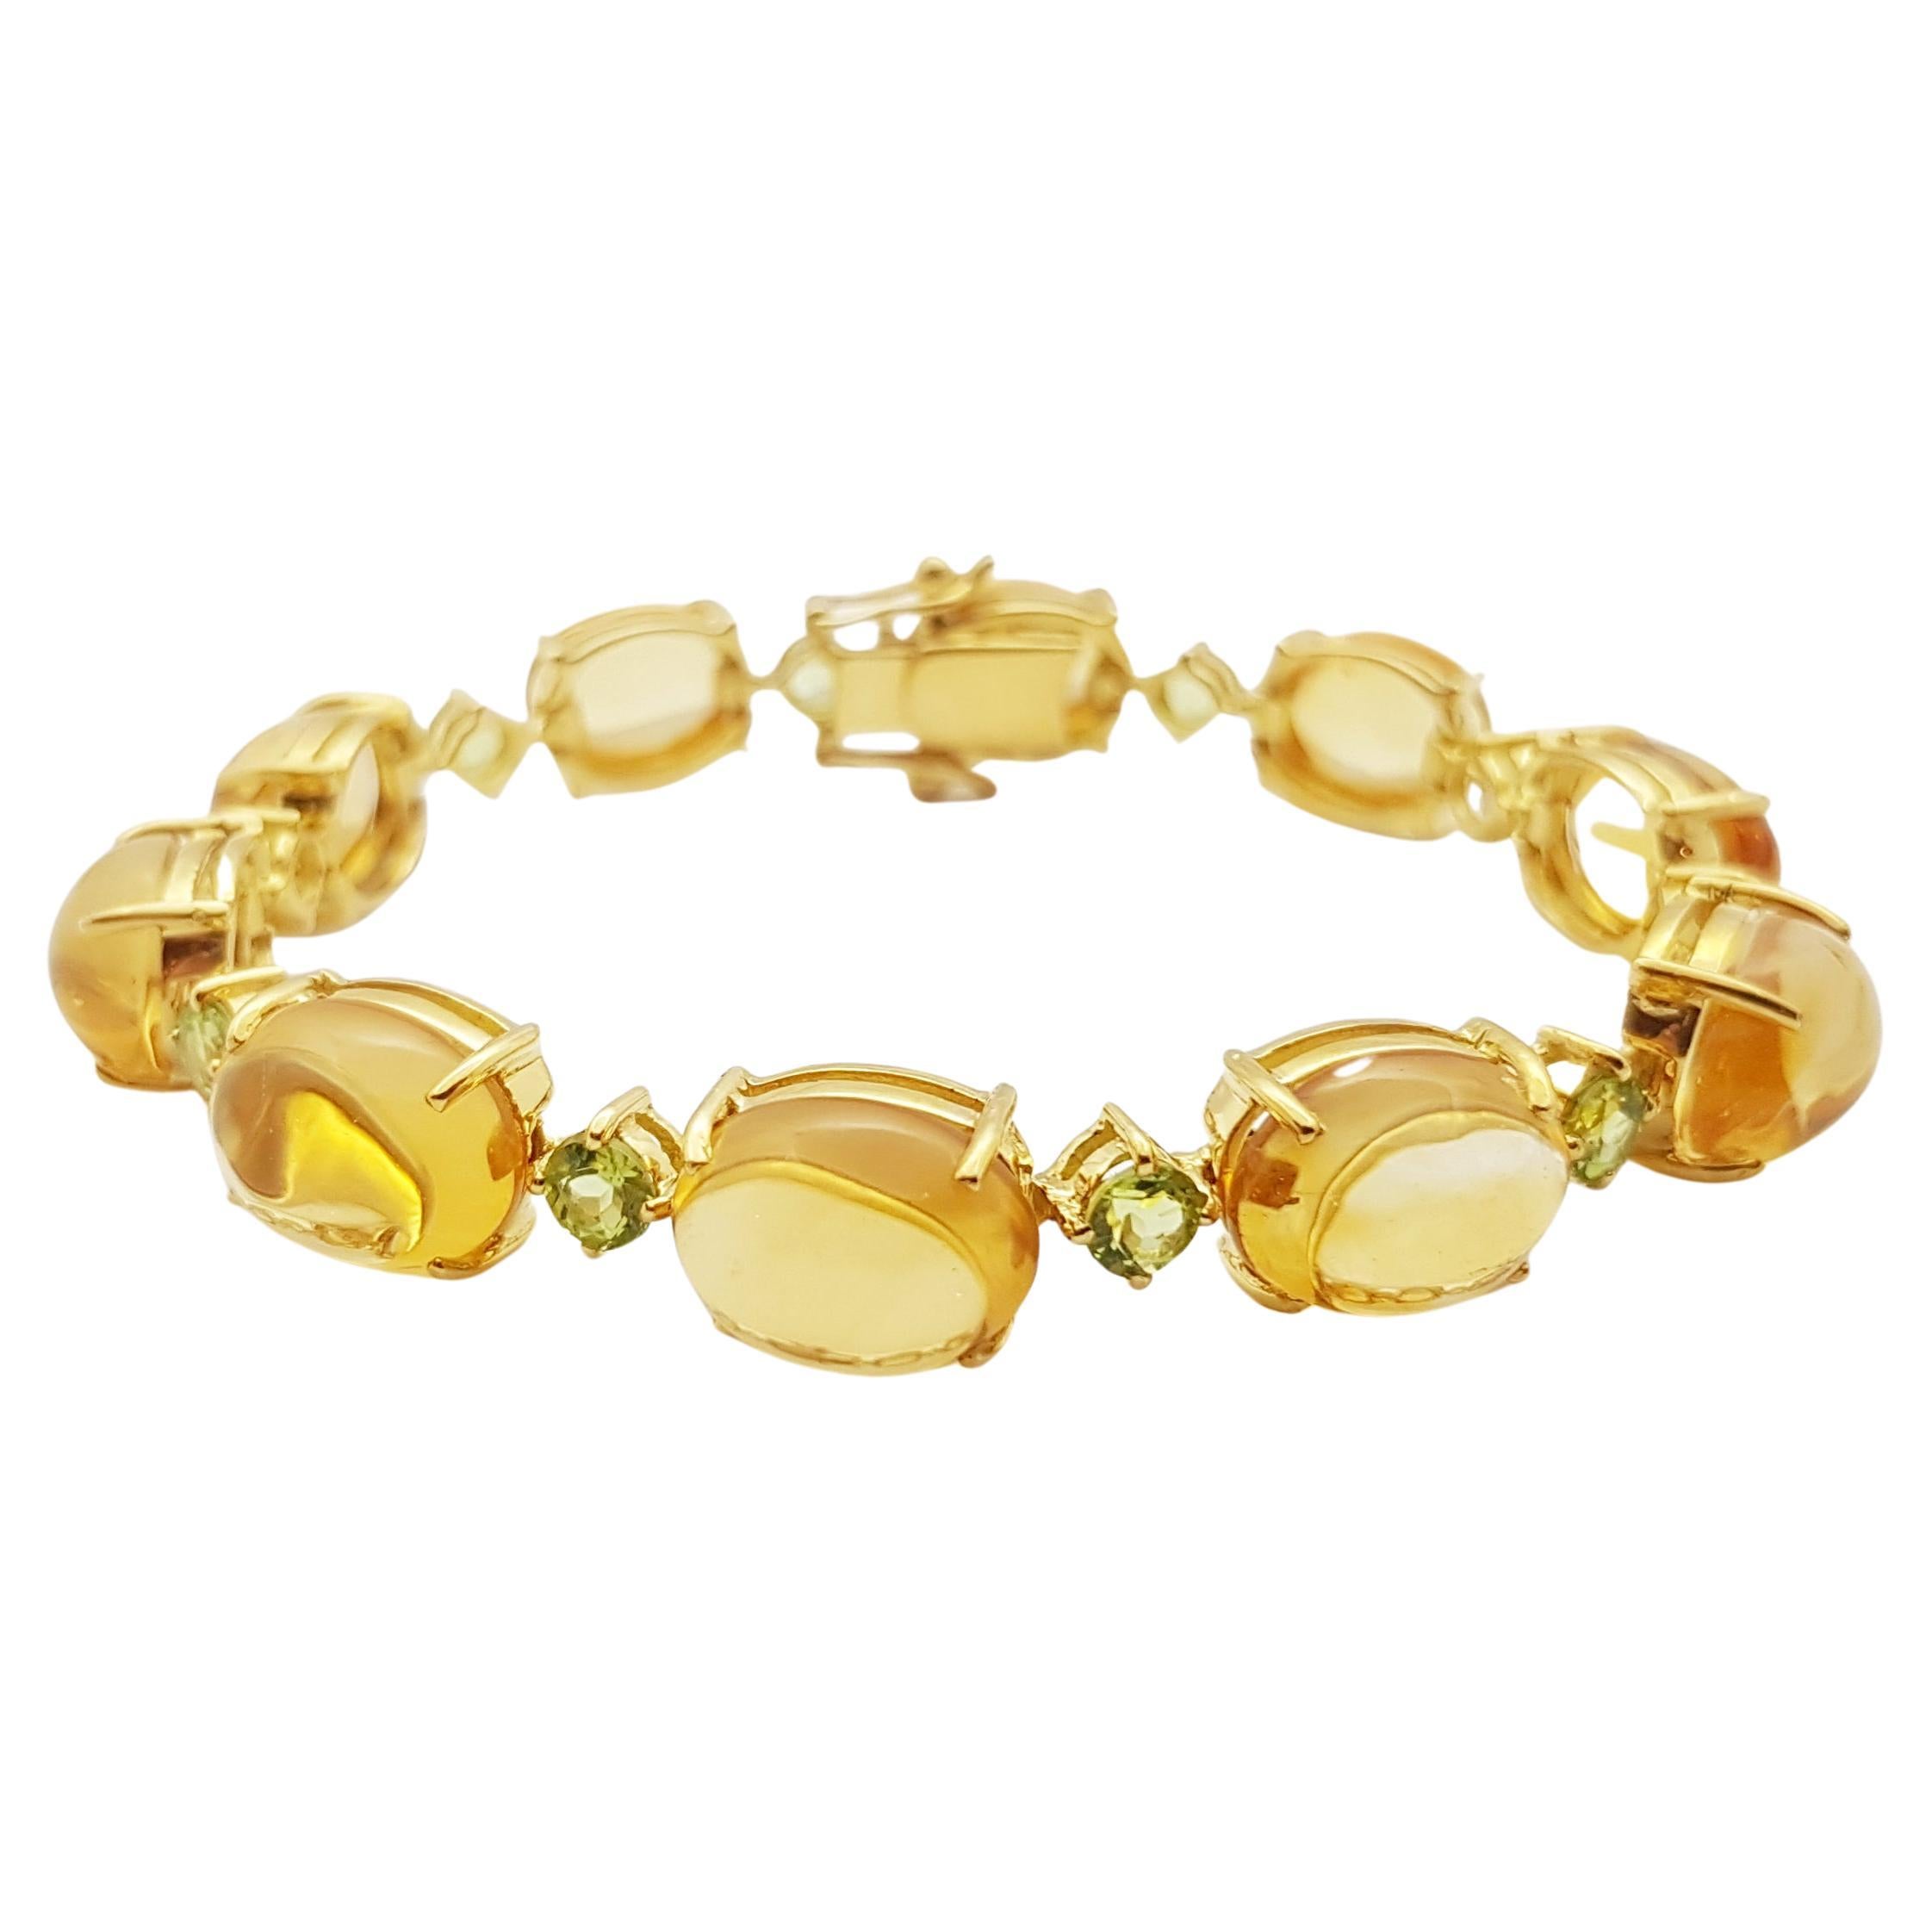 Cabochon Citrine with Peridot Bracelet set in 18 Karat Gold Settings For Sale